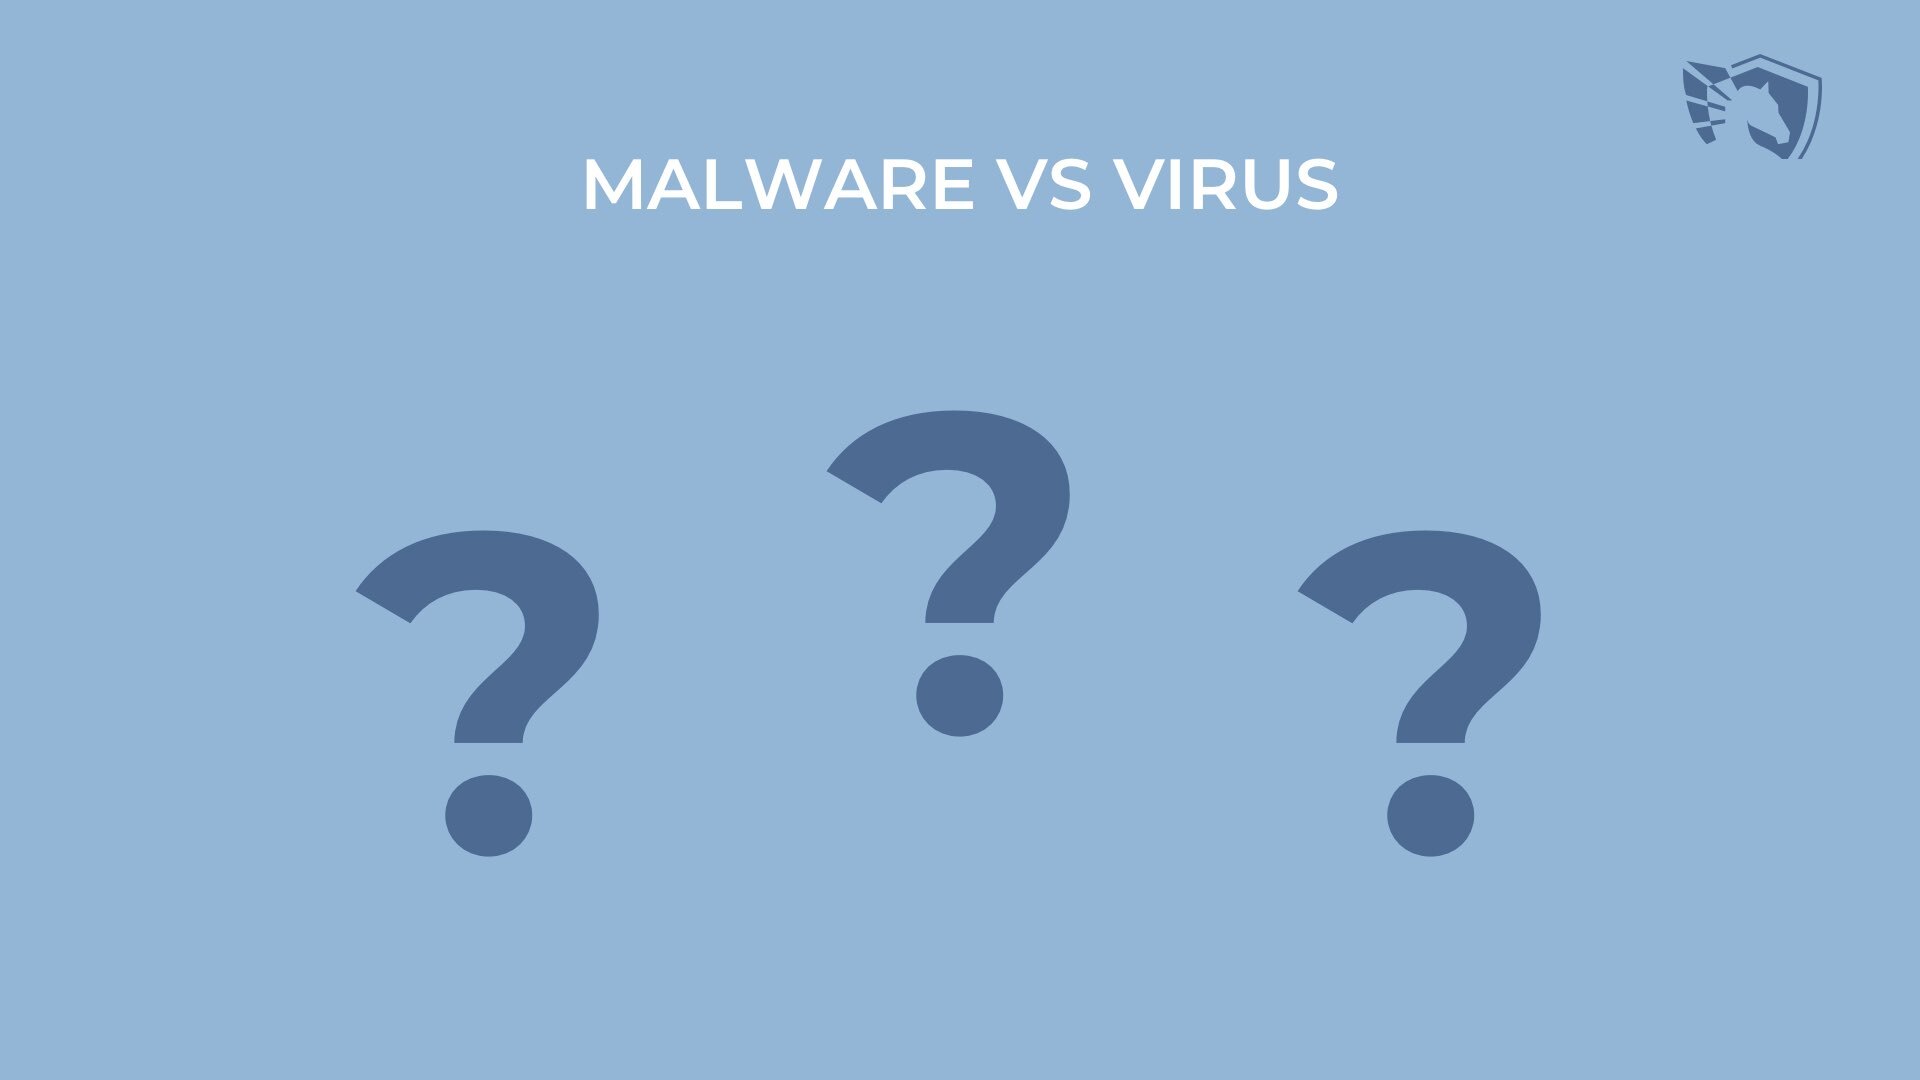 Malware vs Virus - what is the difference?